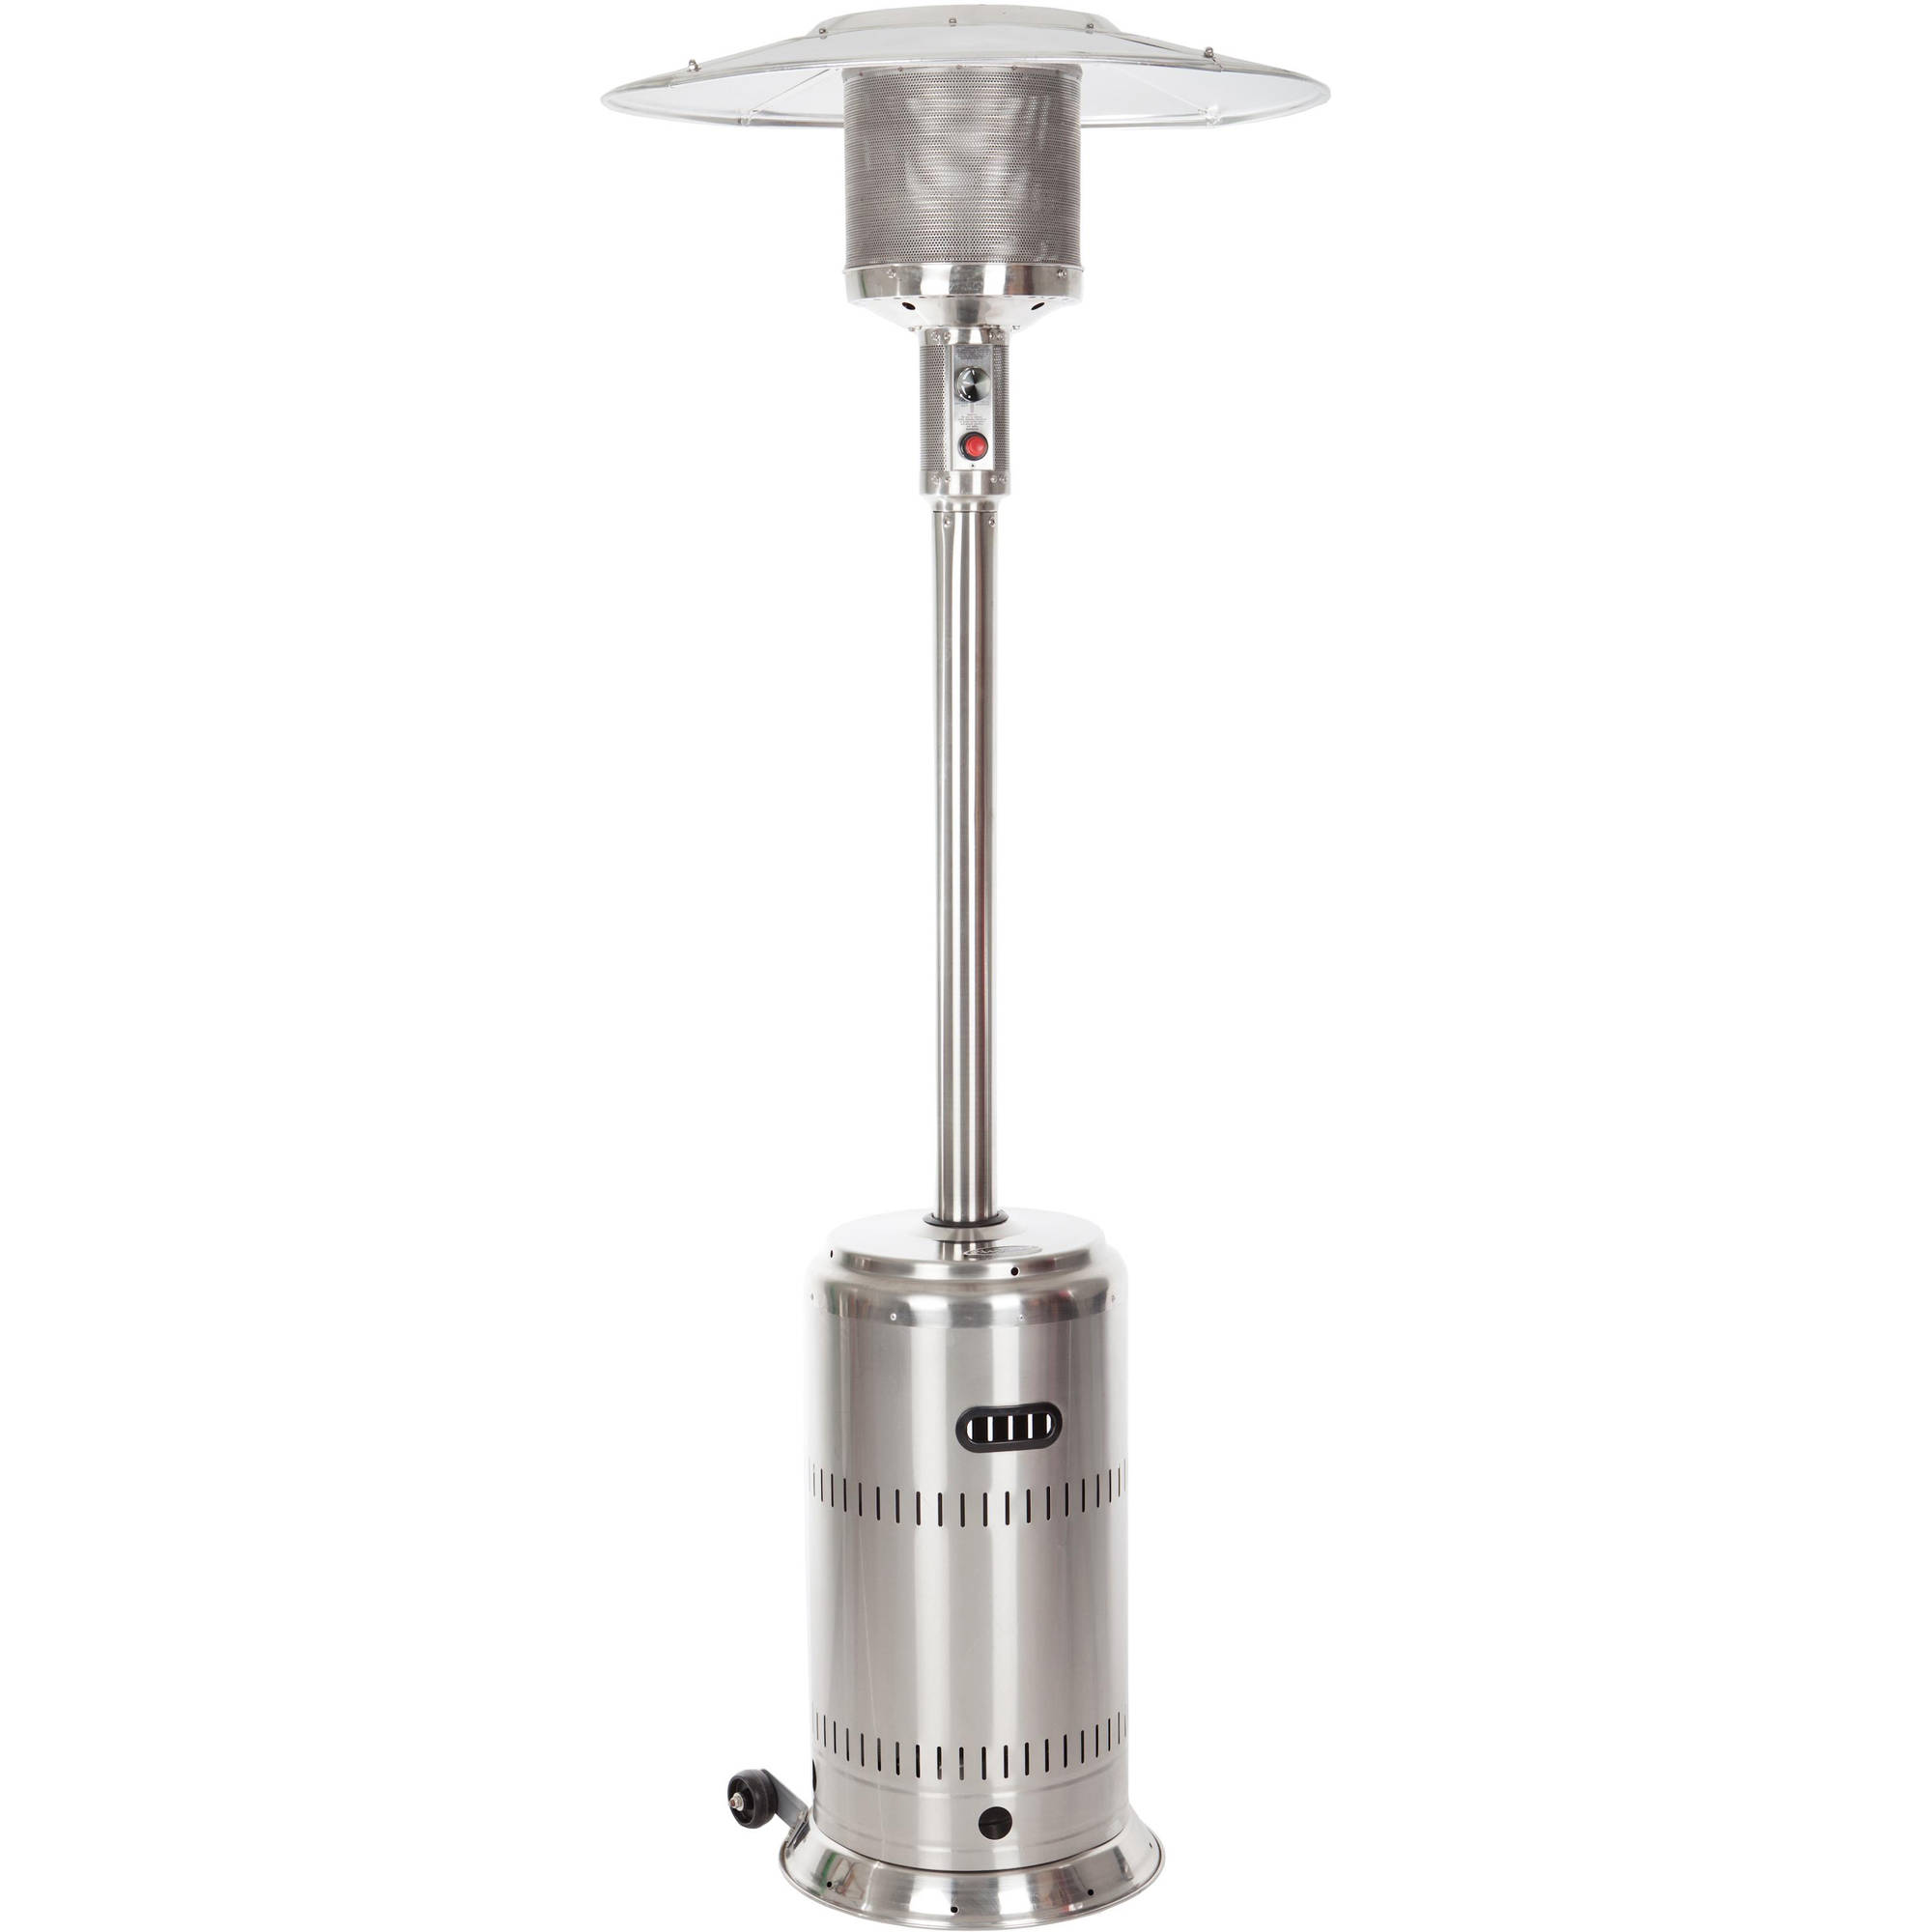 Fire Sense Stainless Steel Commercial Patio Heater - image 1 of 8